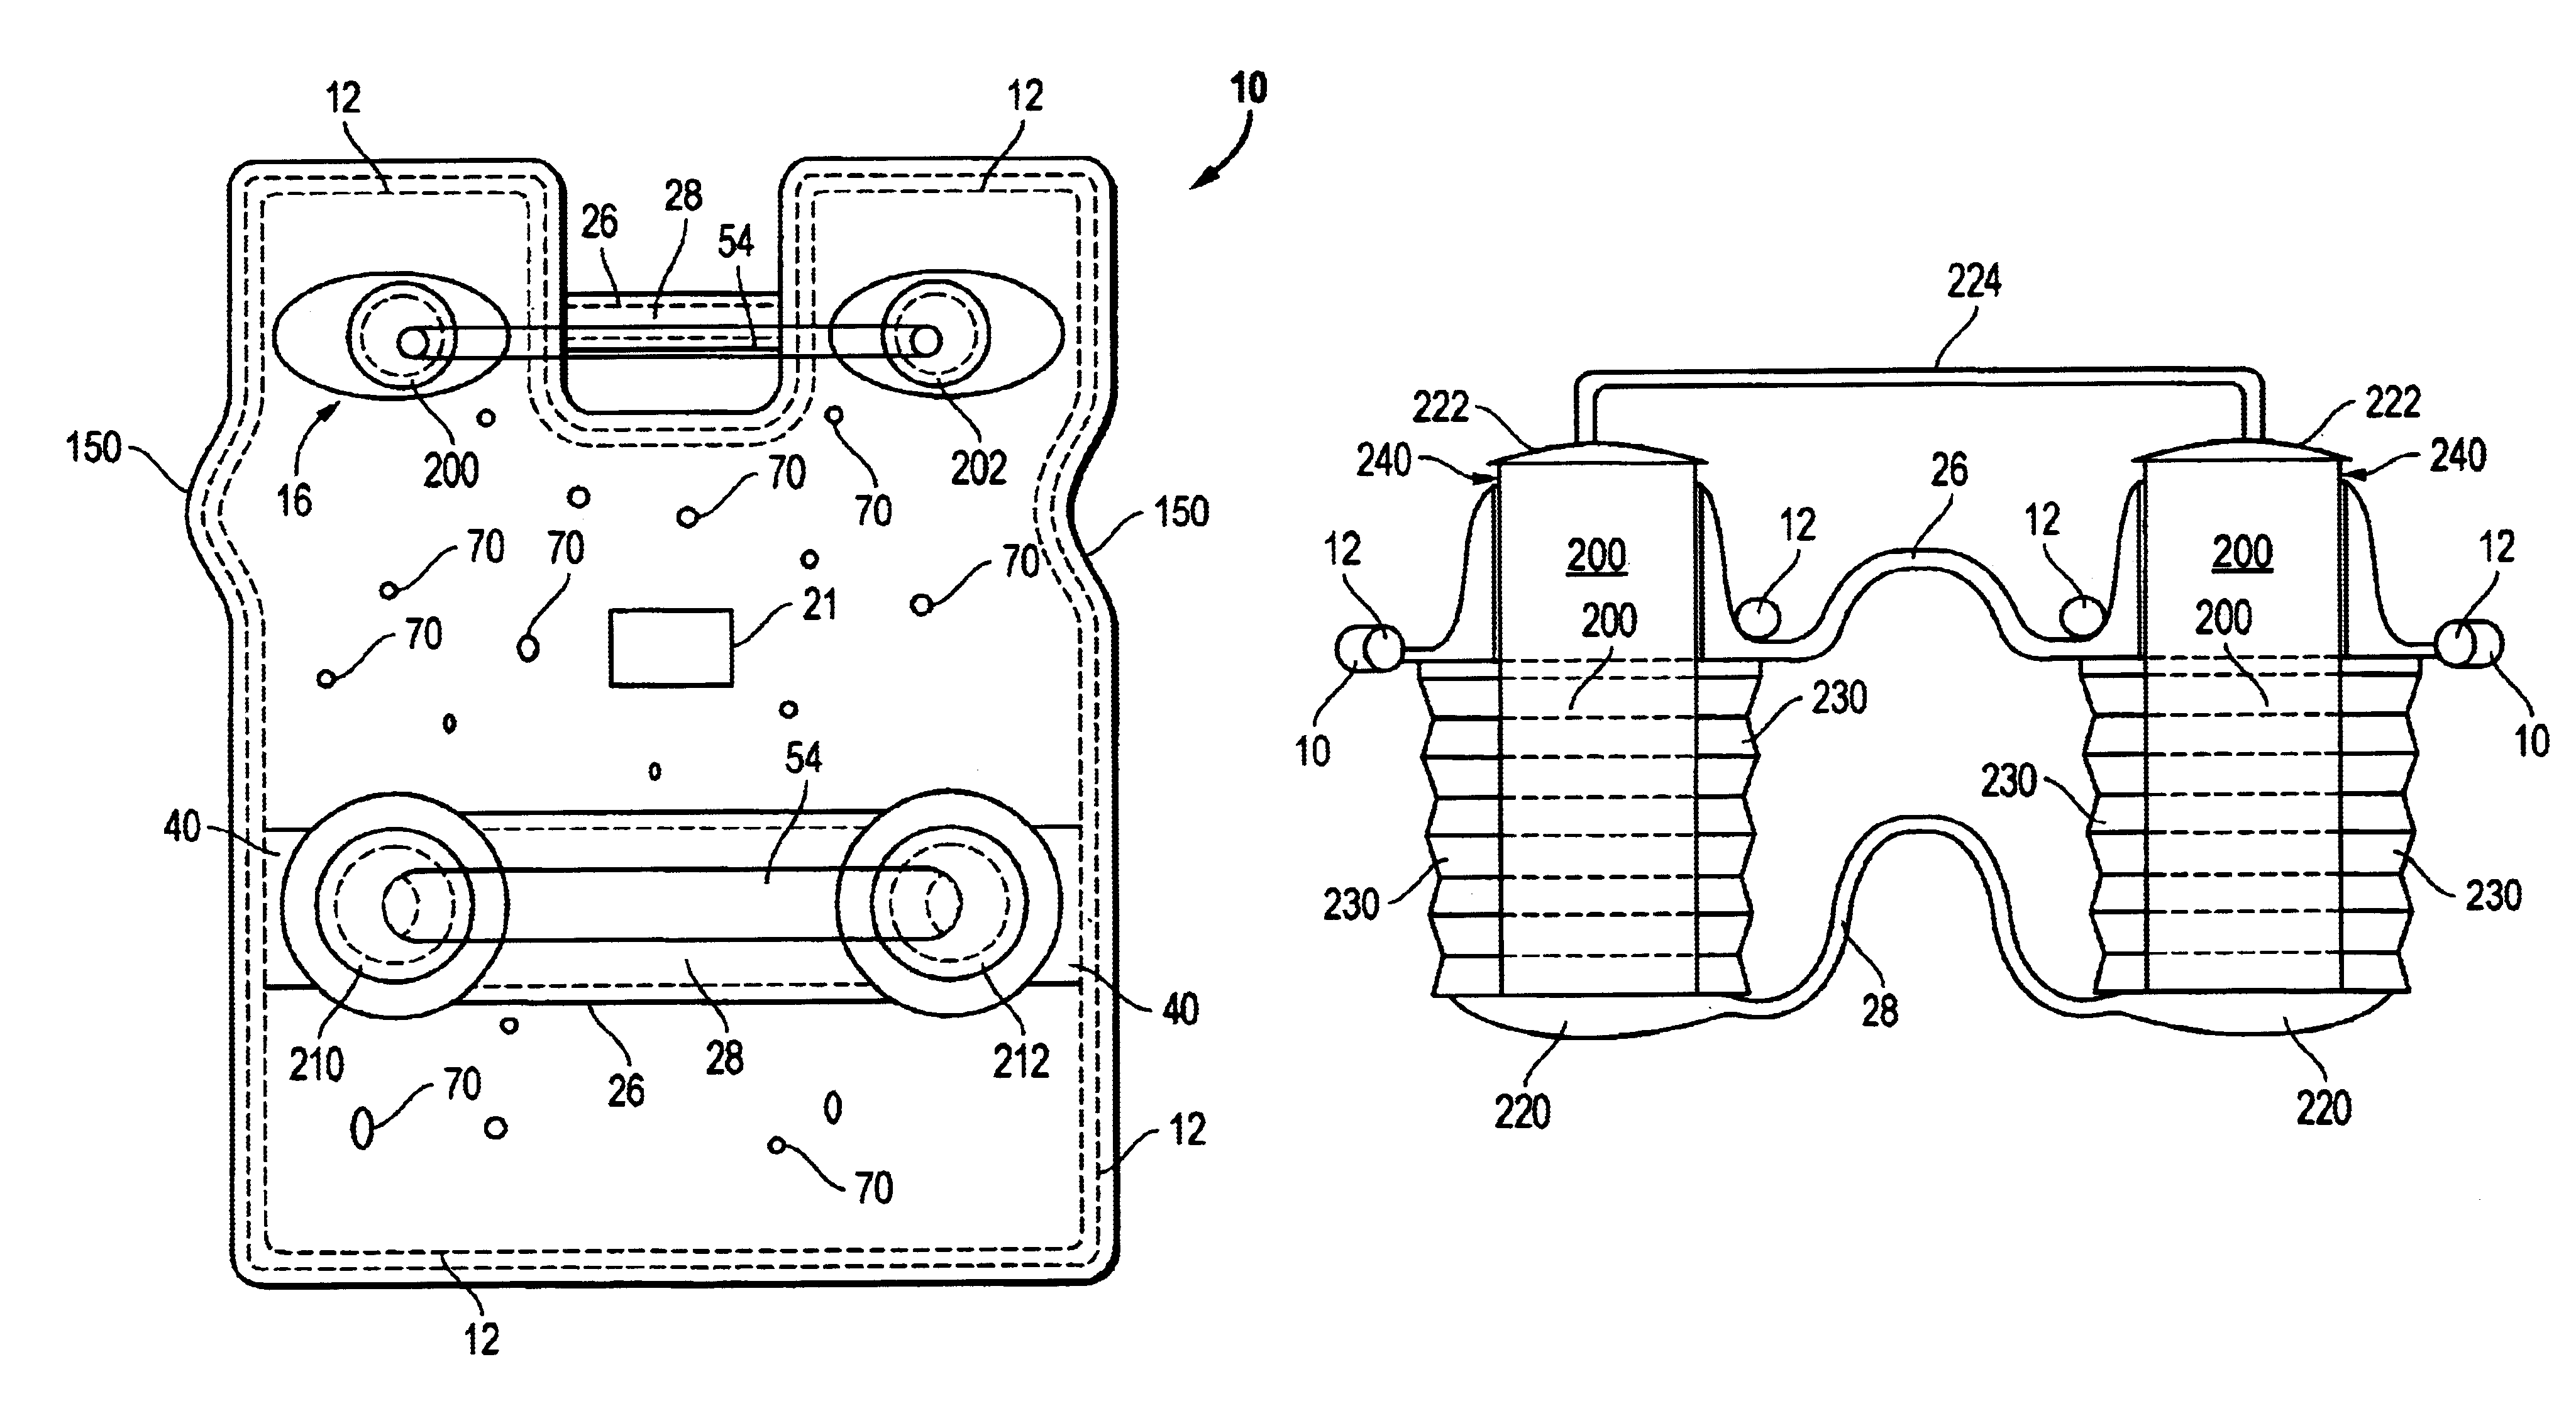 Blanket having extendable supports